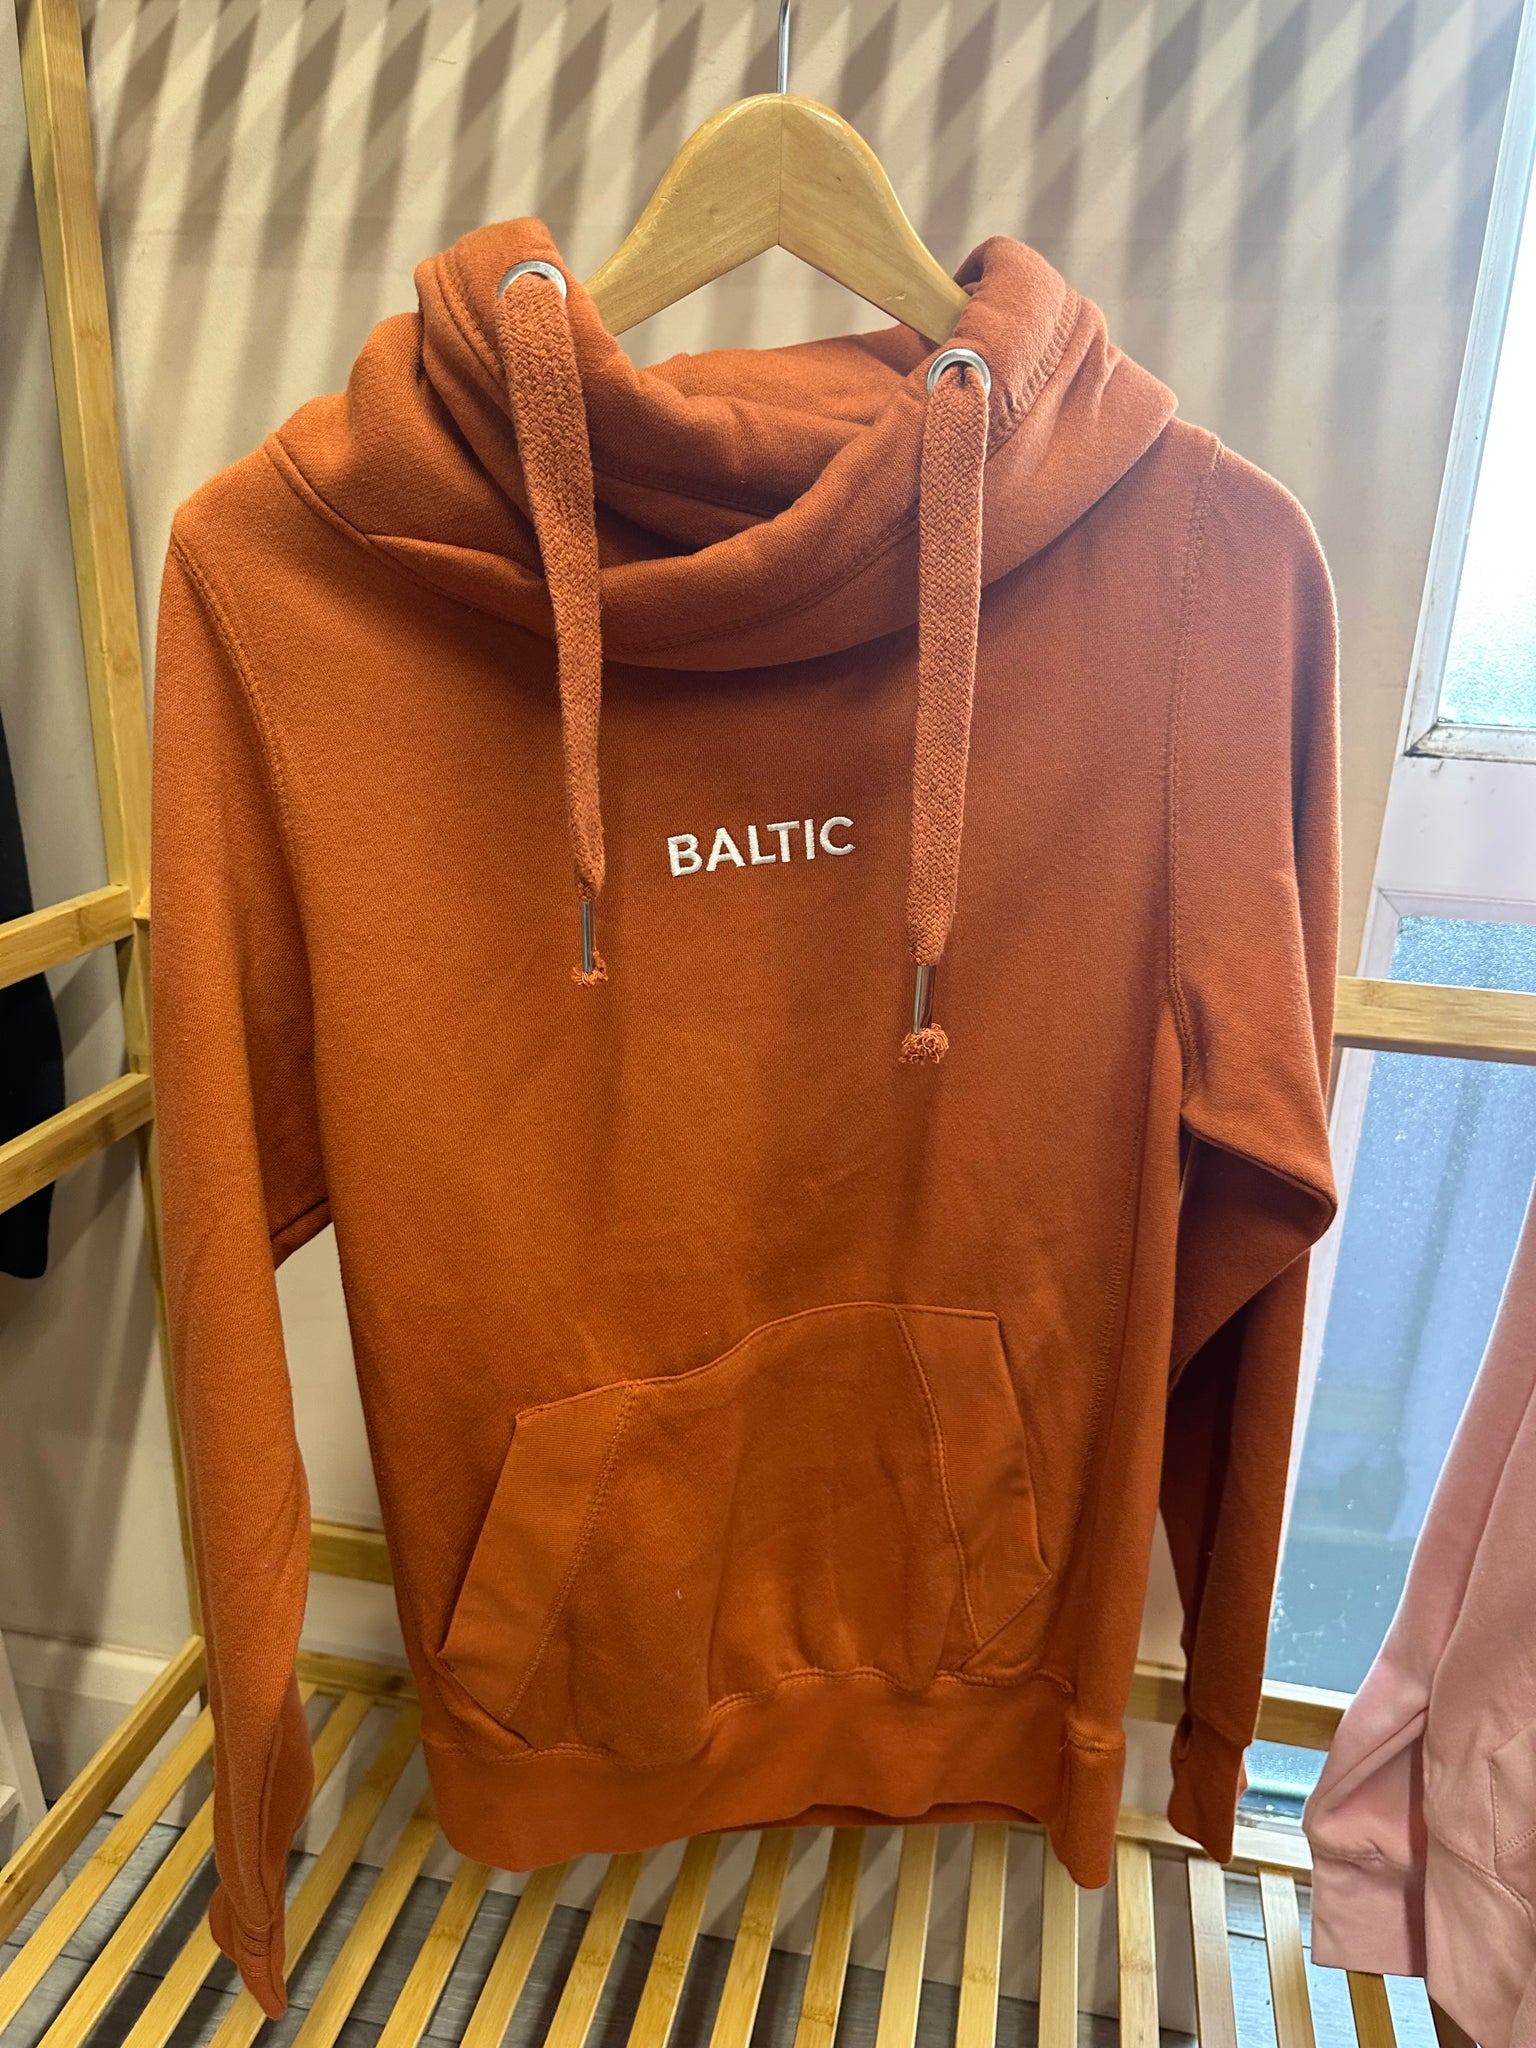 SAMPLE SALE Embroidered 'Baltic' Crossneck Hoodie, Ginger with Ivory stitching Size XS, M